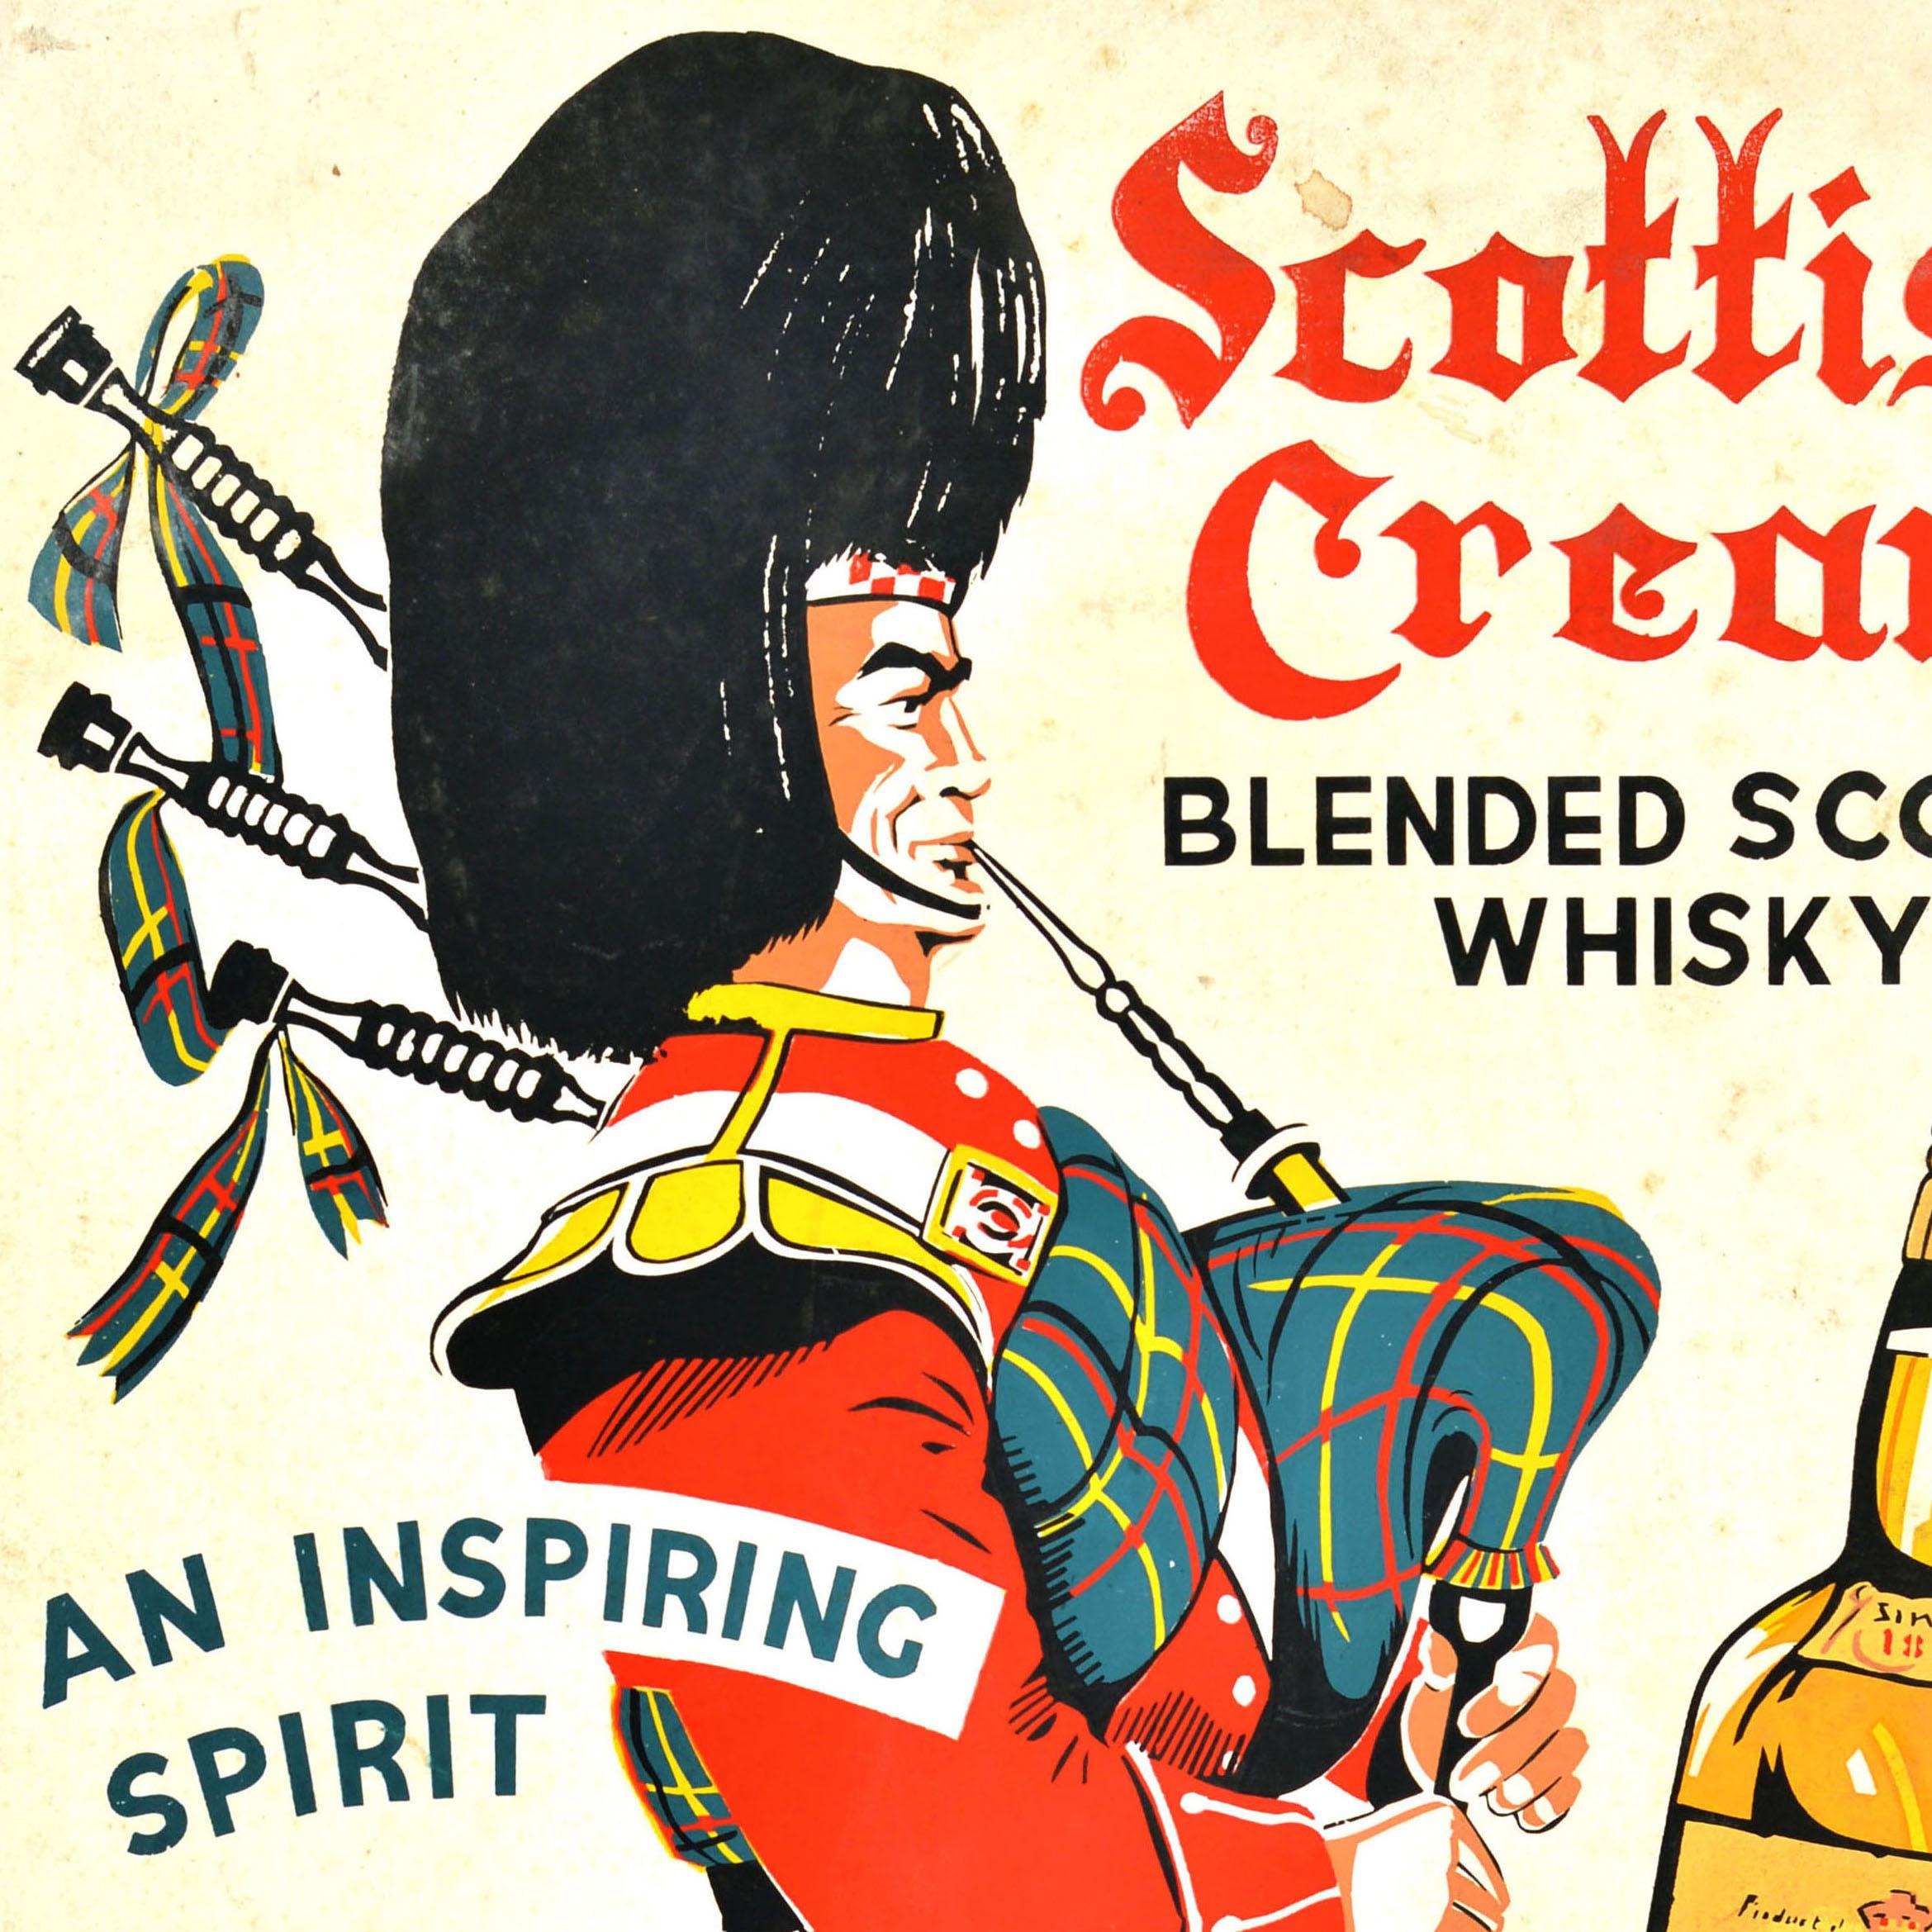 Original Vintage Drink Advertising Poster Scottish Cream Blended Scotch Whisky - Yellow Print by Unknown